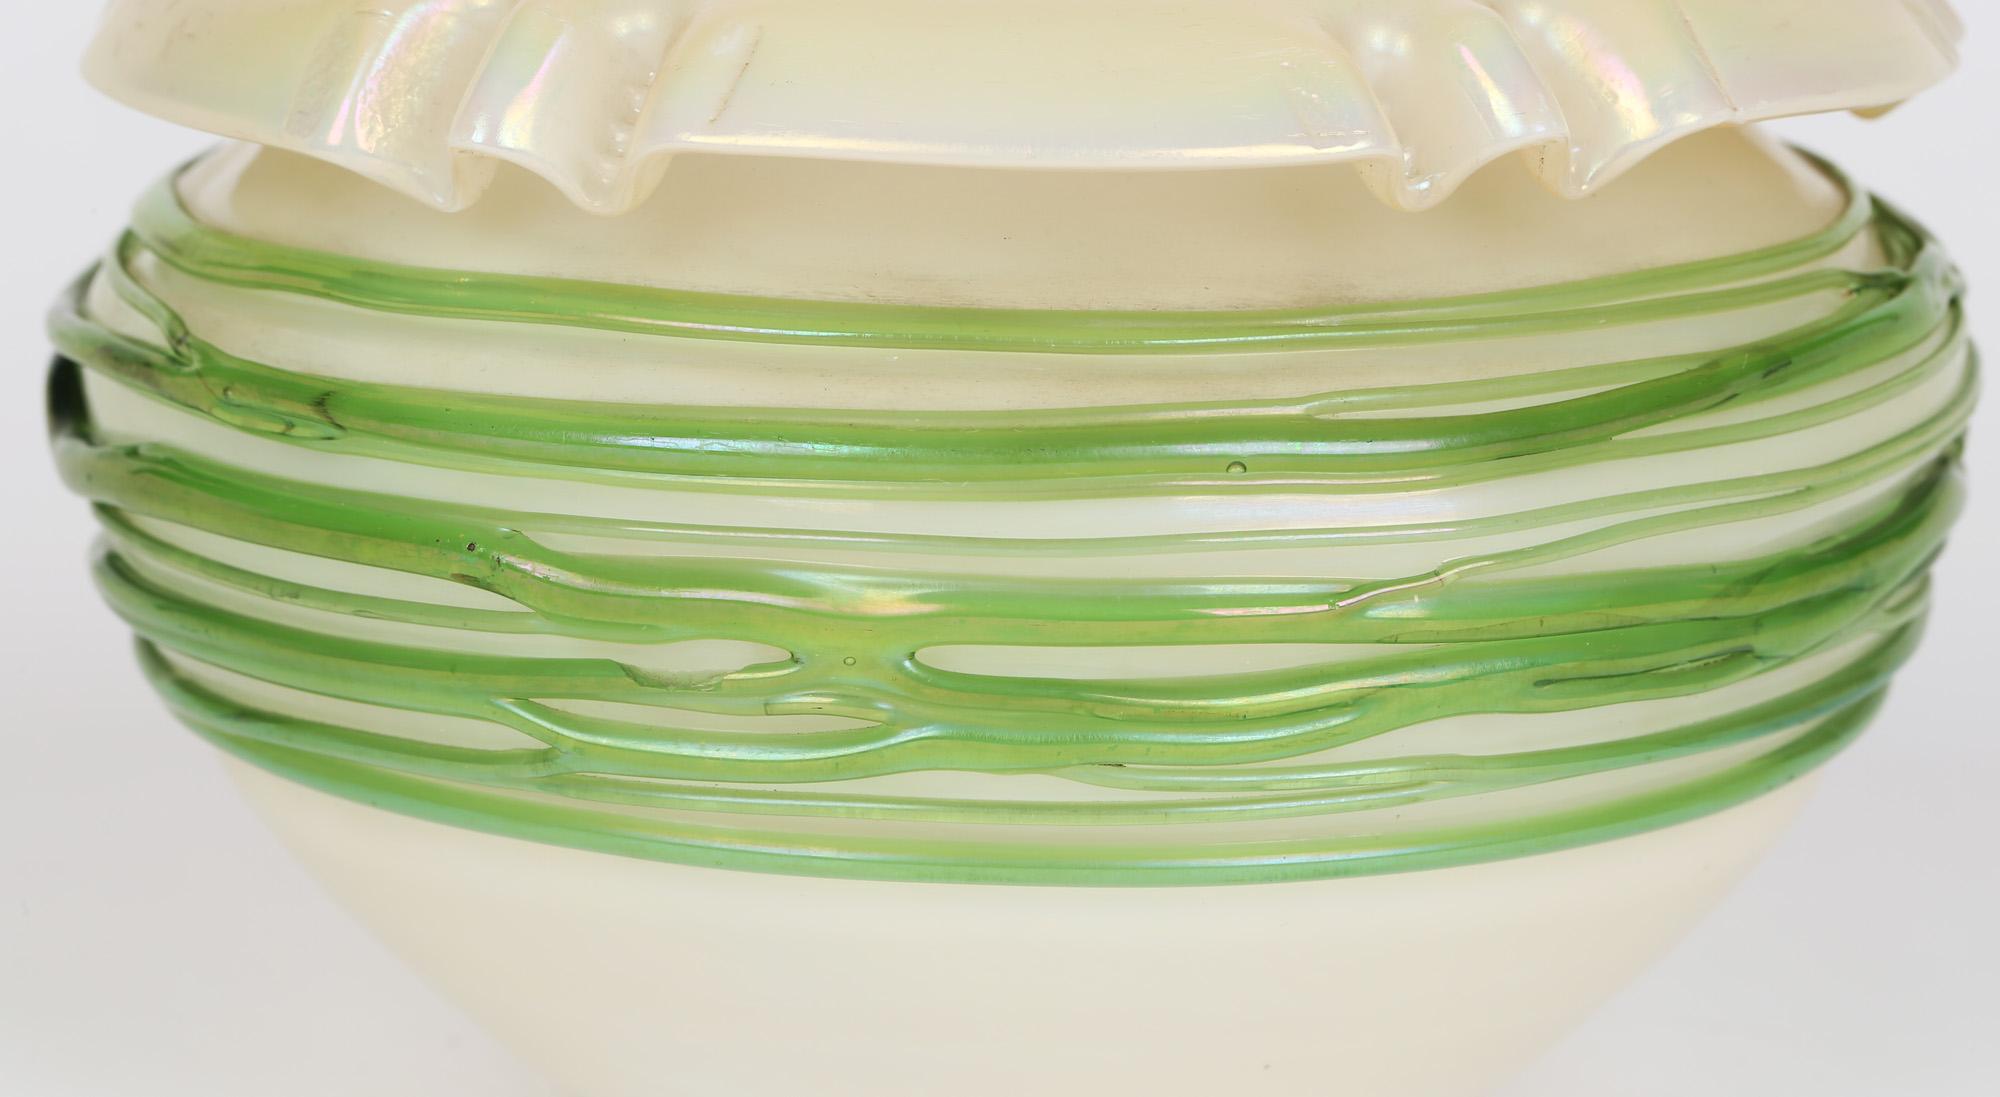 A stunning Art Nouveau iridescent glass vase applied with green trailed thread patterning attributed to Palme König and dating from the early 20th century. The origins of this stunning piece have been disputed however we believe it is of Bohemian